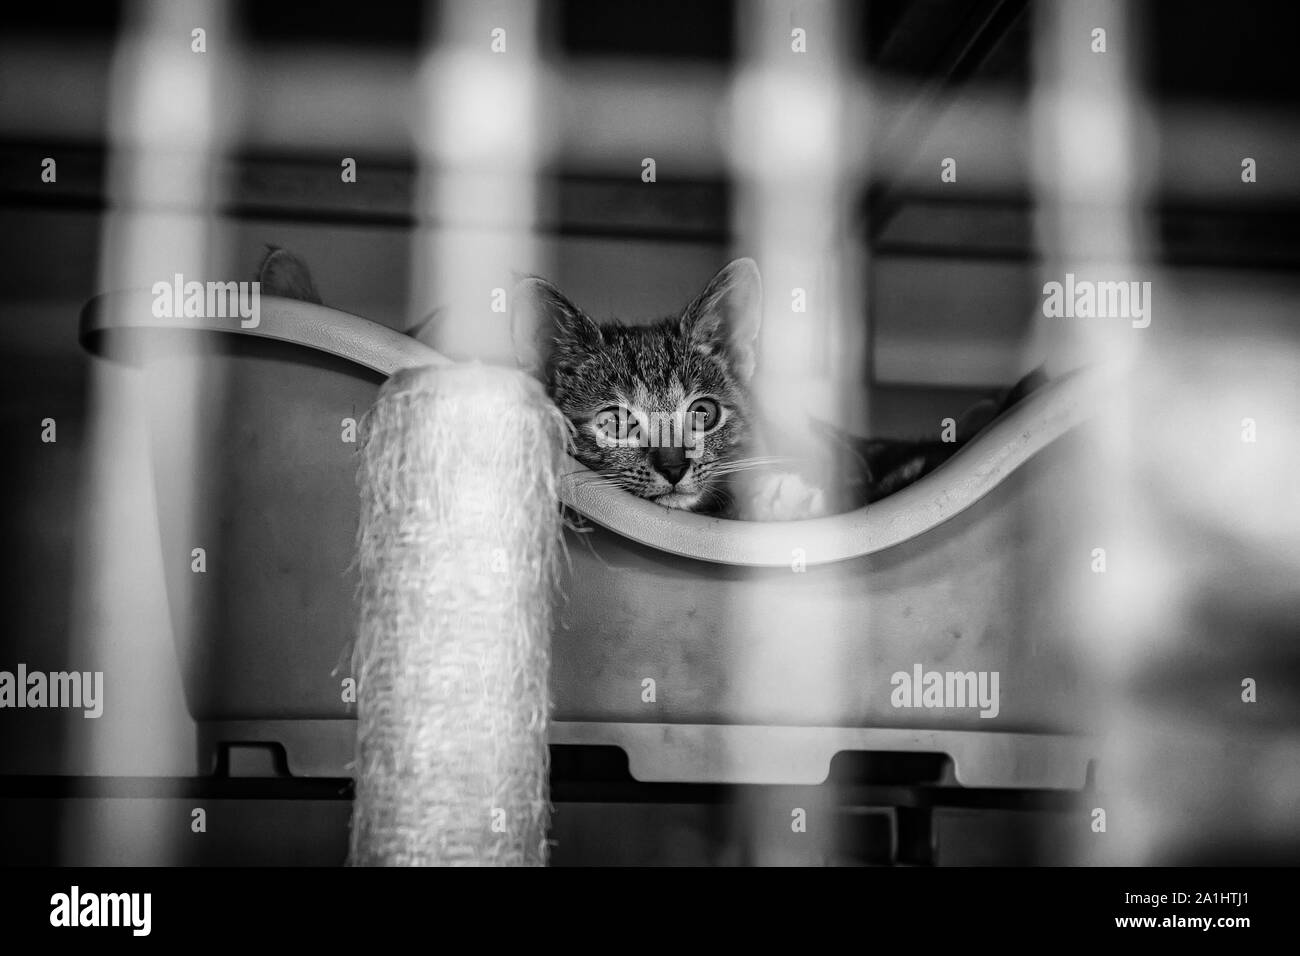 Abandoned cats in shelter, shelter detail on an Amsterdam ship Stock Photo